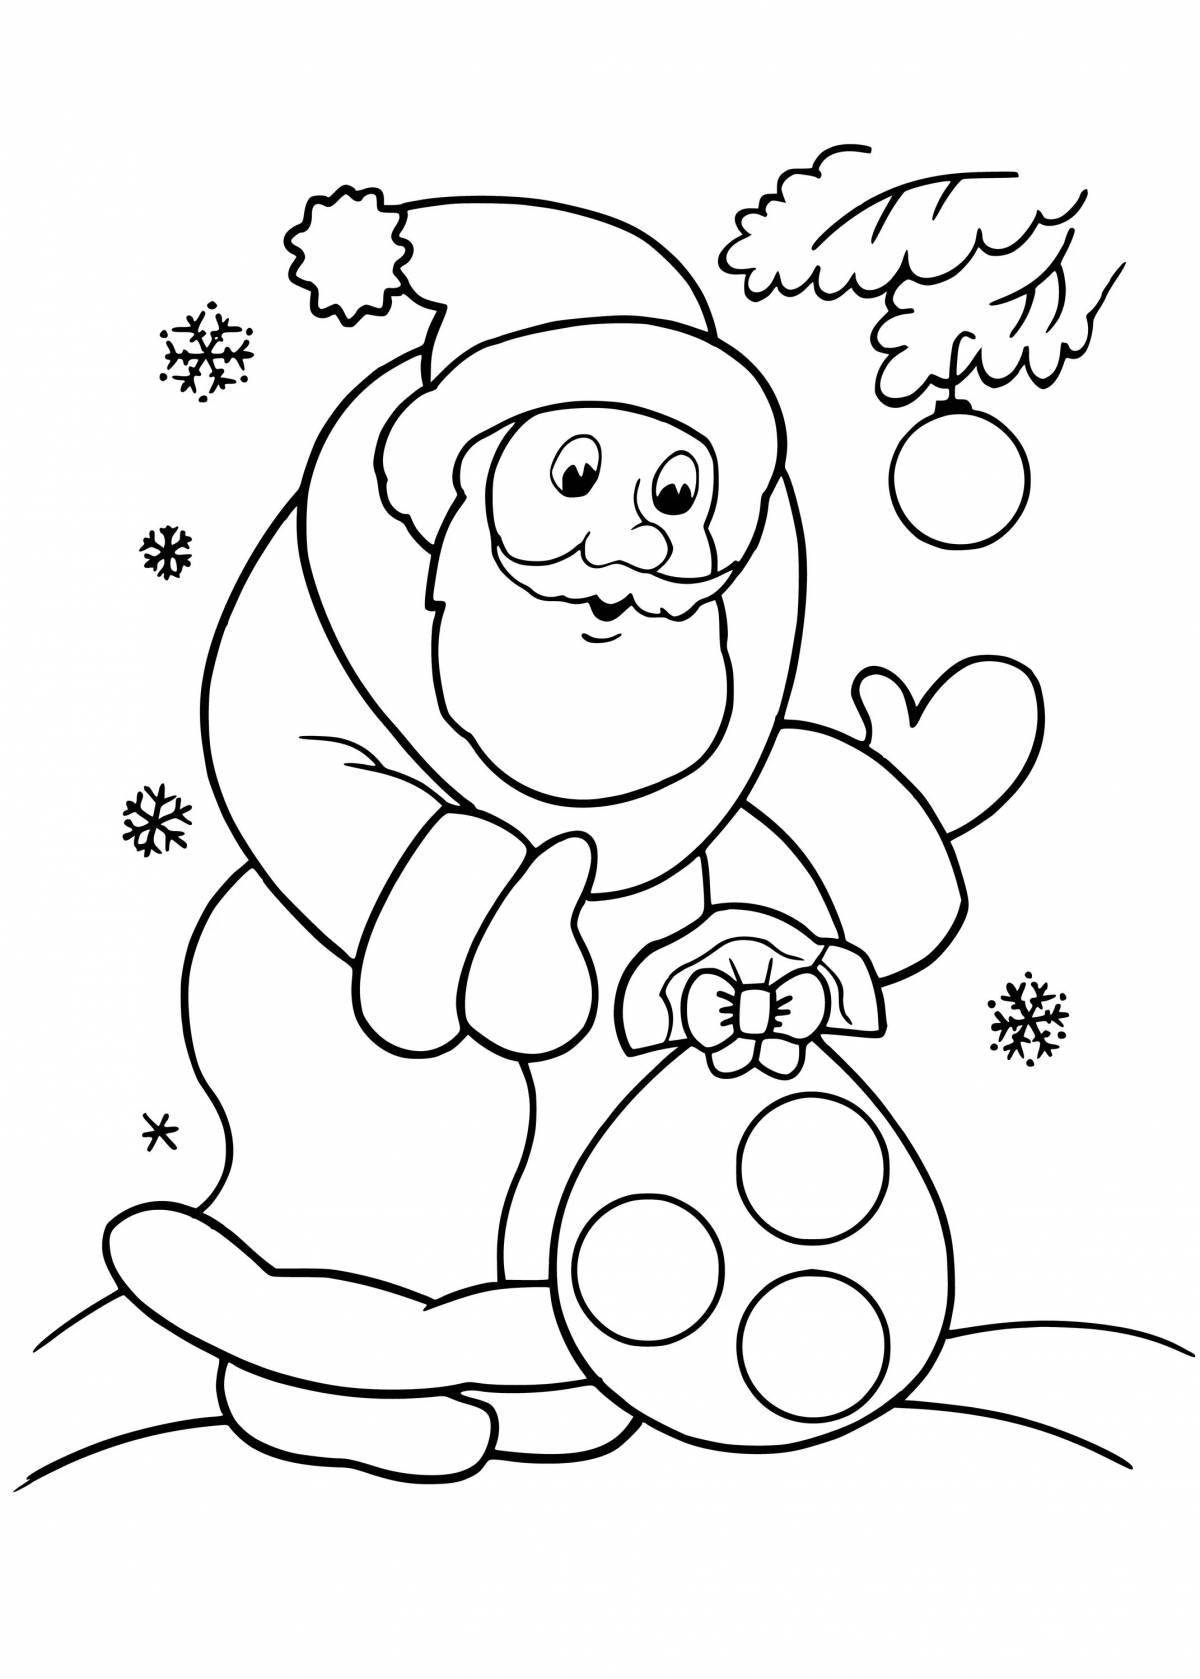 Glittering Santa Claus Coloring Page for 2-3 year olds